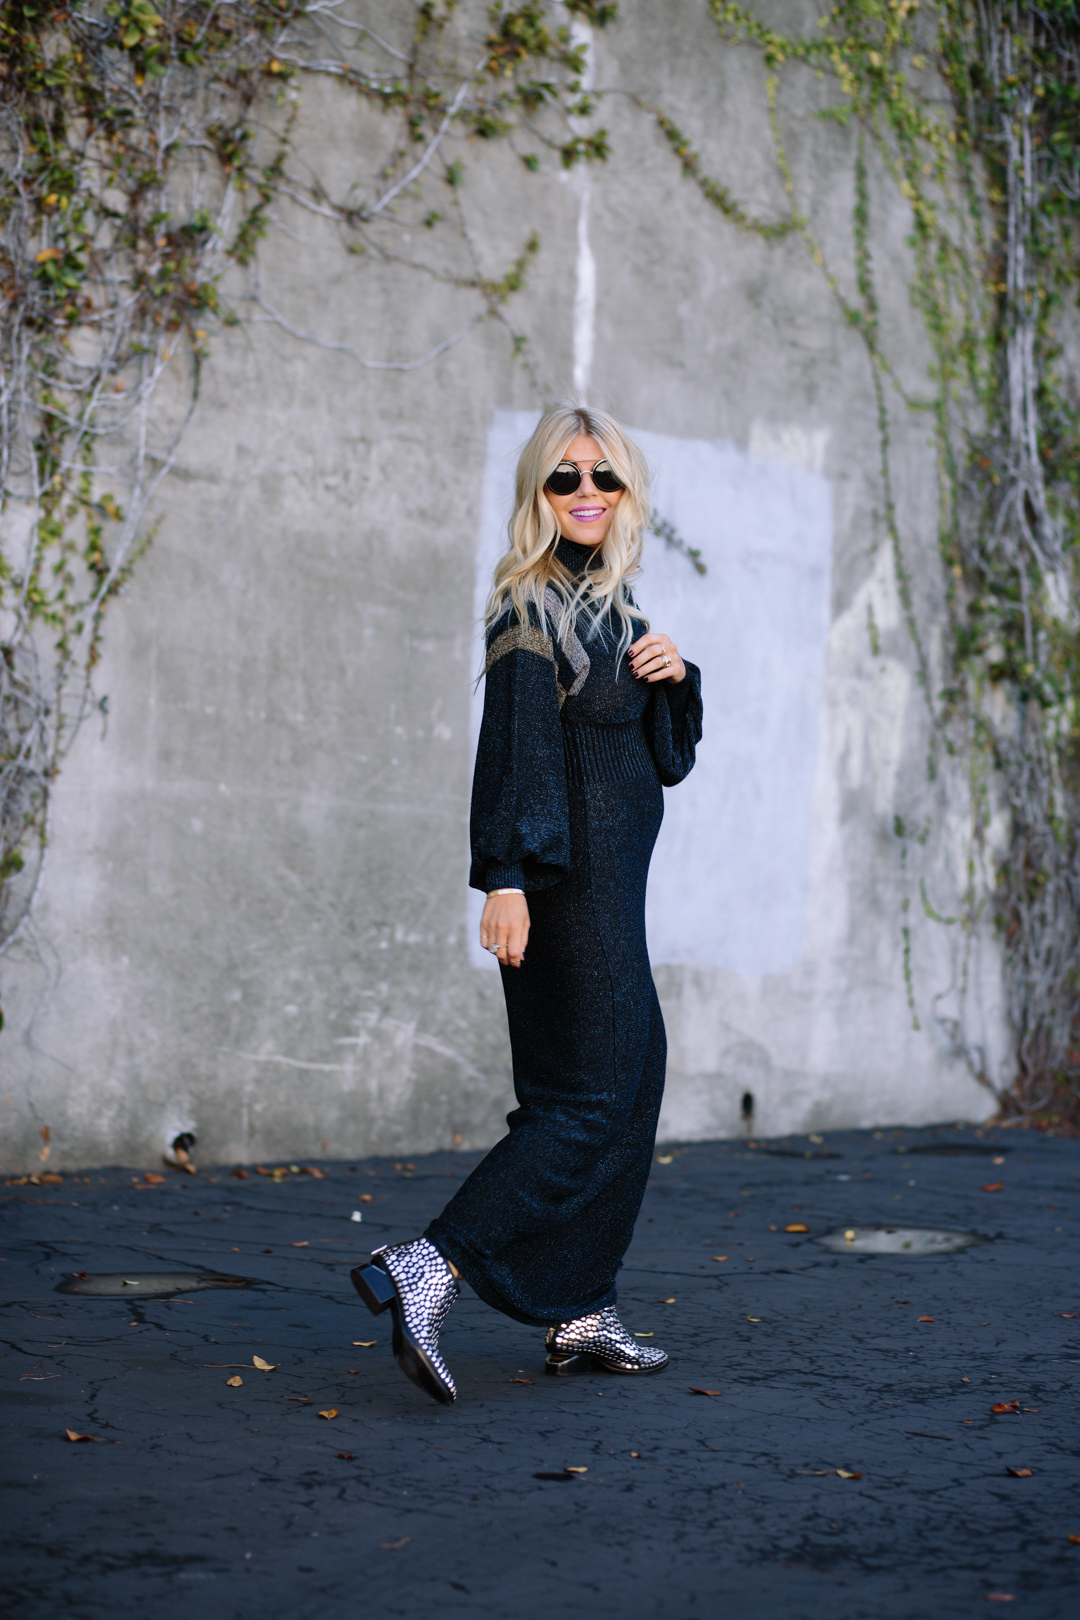 Lisa Allen of Lunchpails and Lipstick wearing a free people maxi dress with alexander wang studded booties and wild fox sunglasses